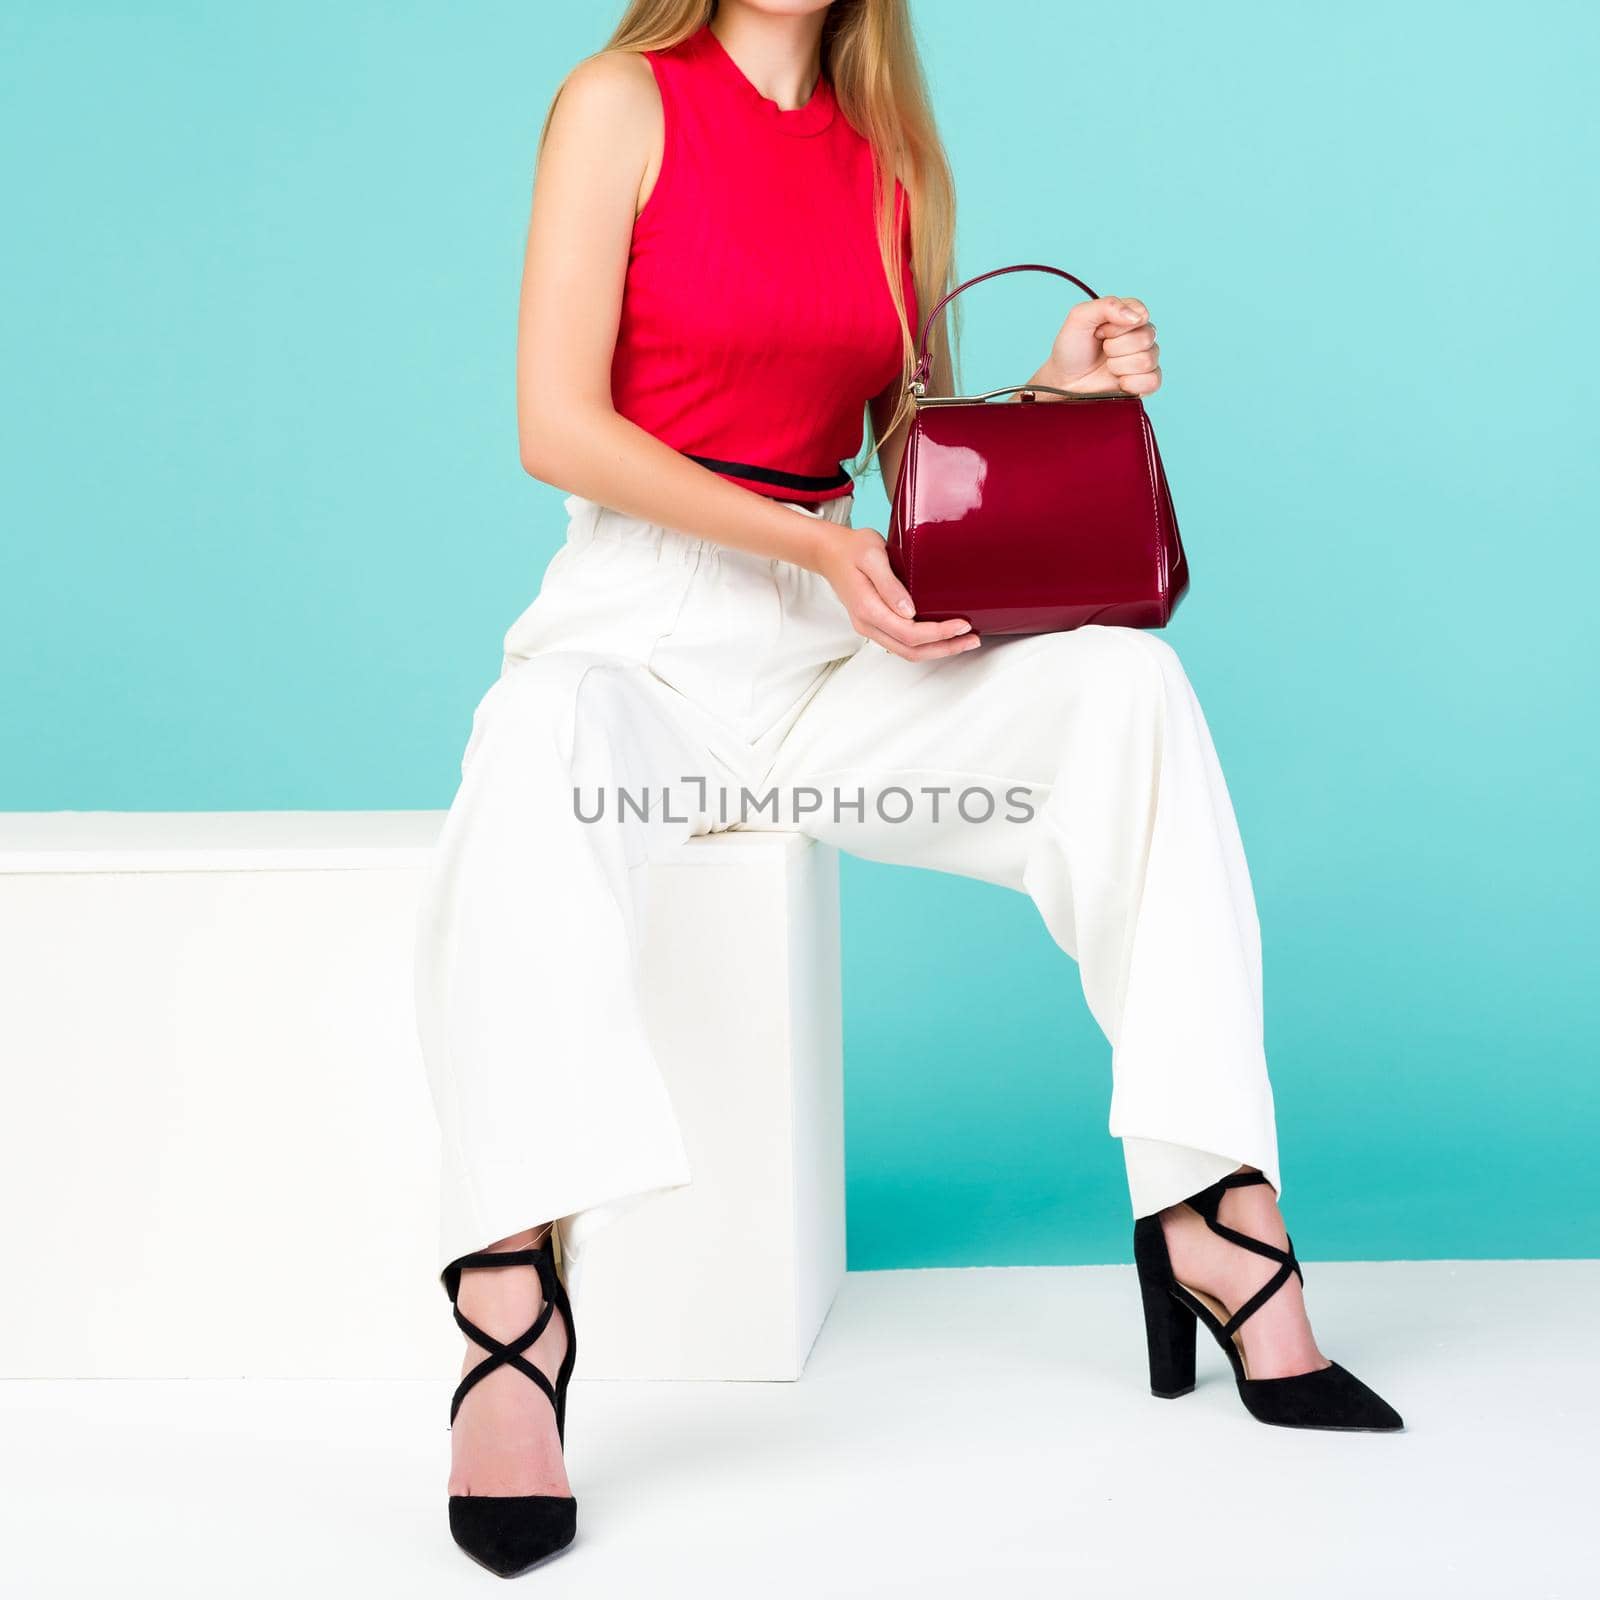 Beautiful woman sitting on the bench with red handbag purse and high heel shoes. - image